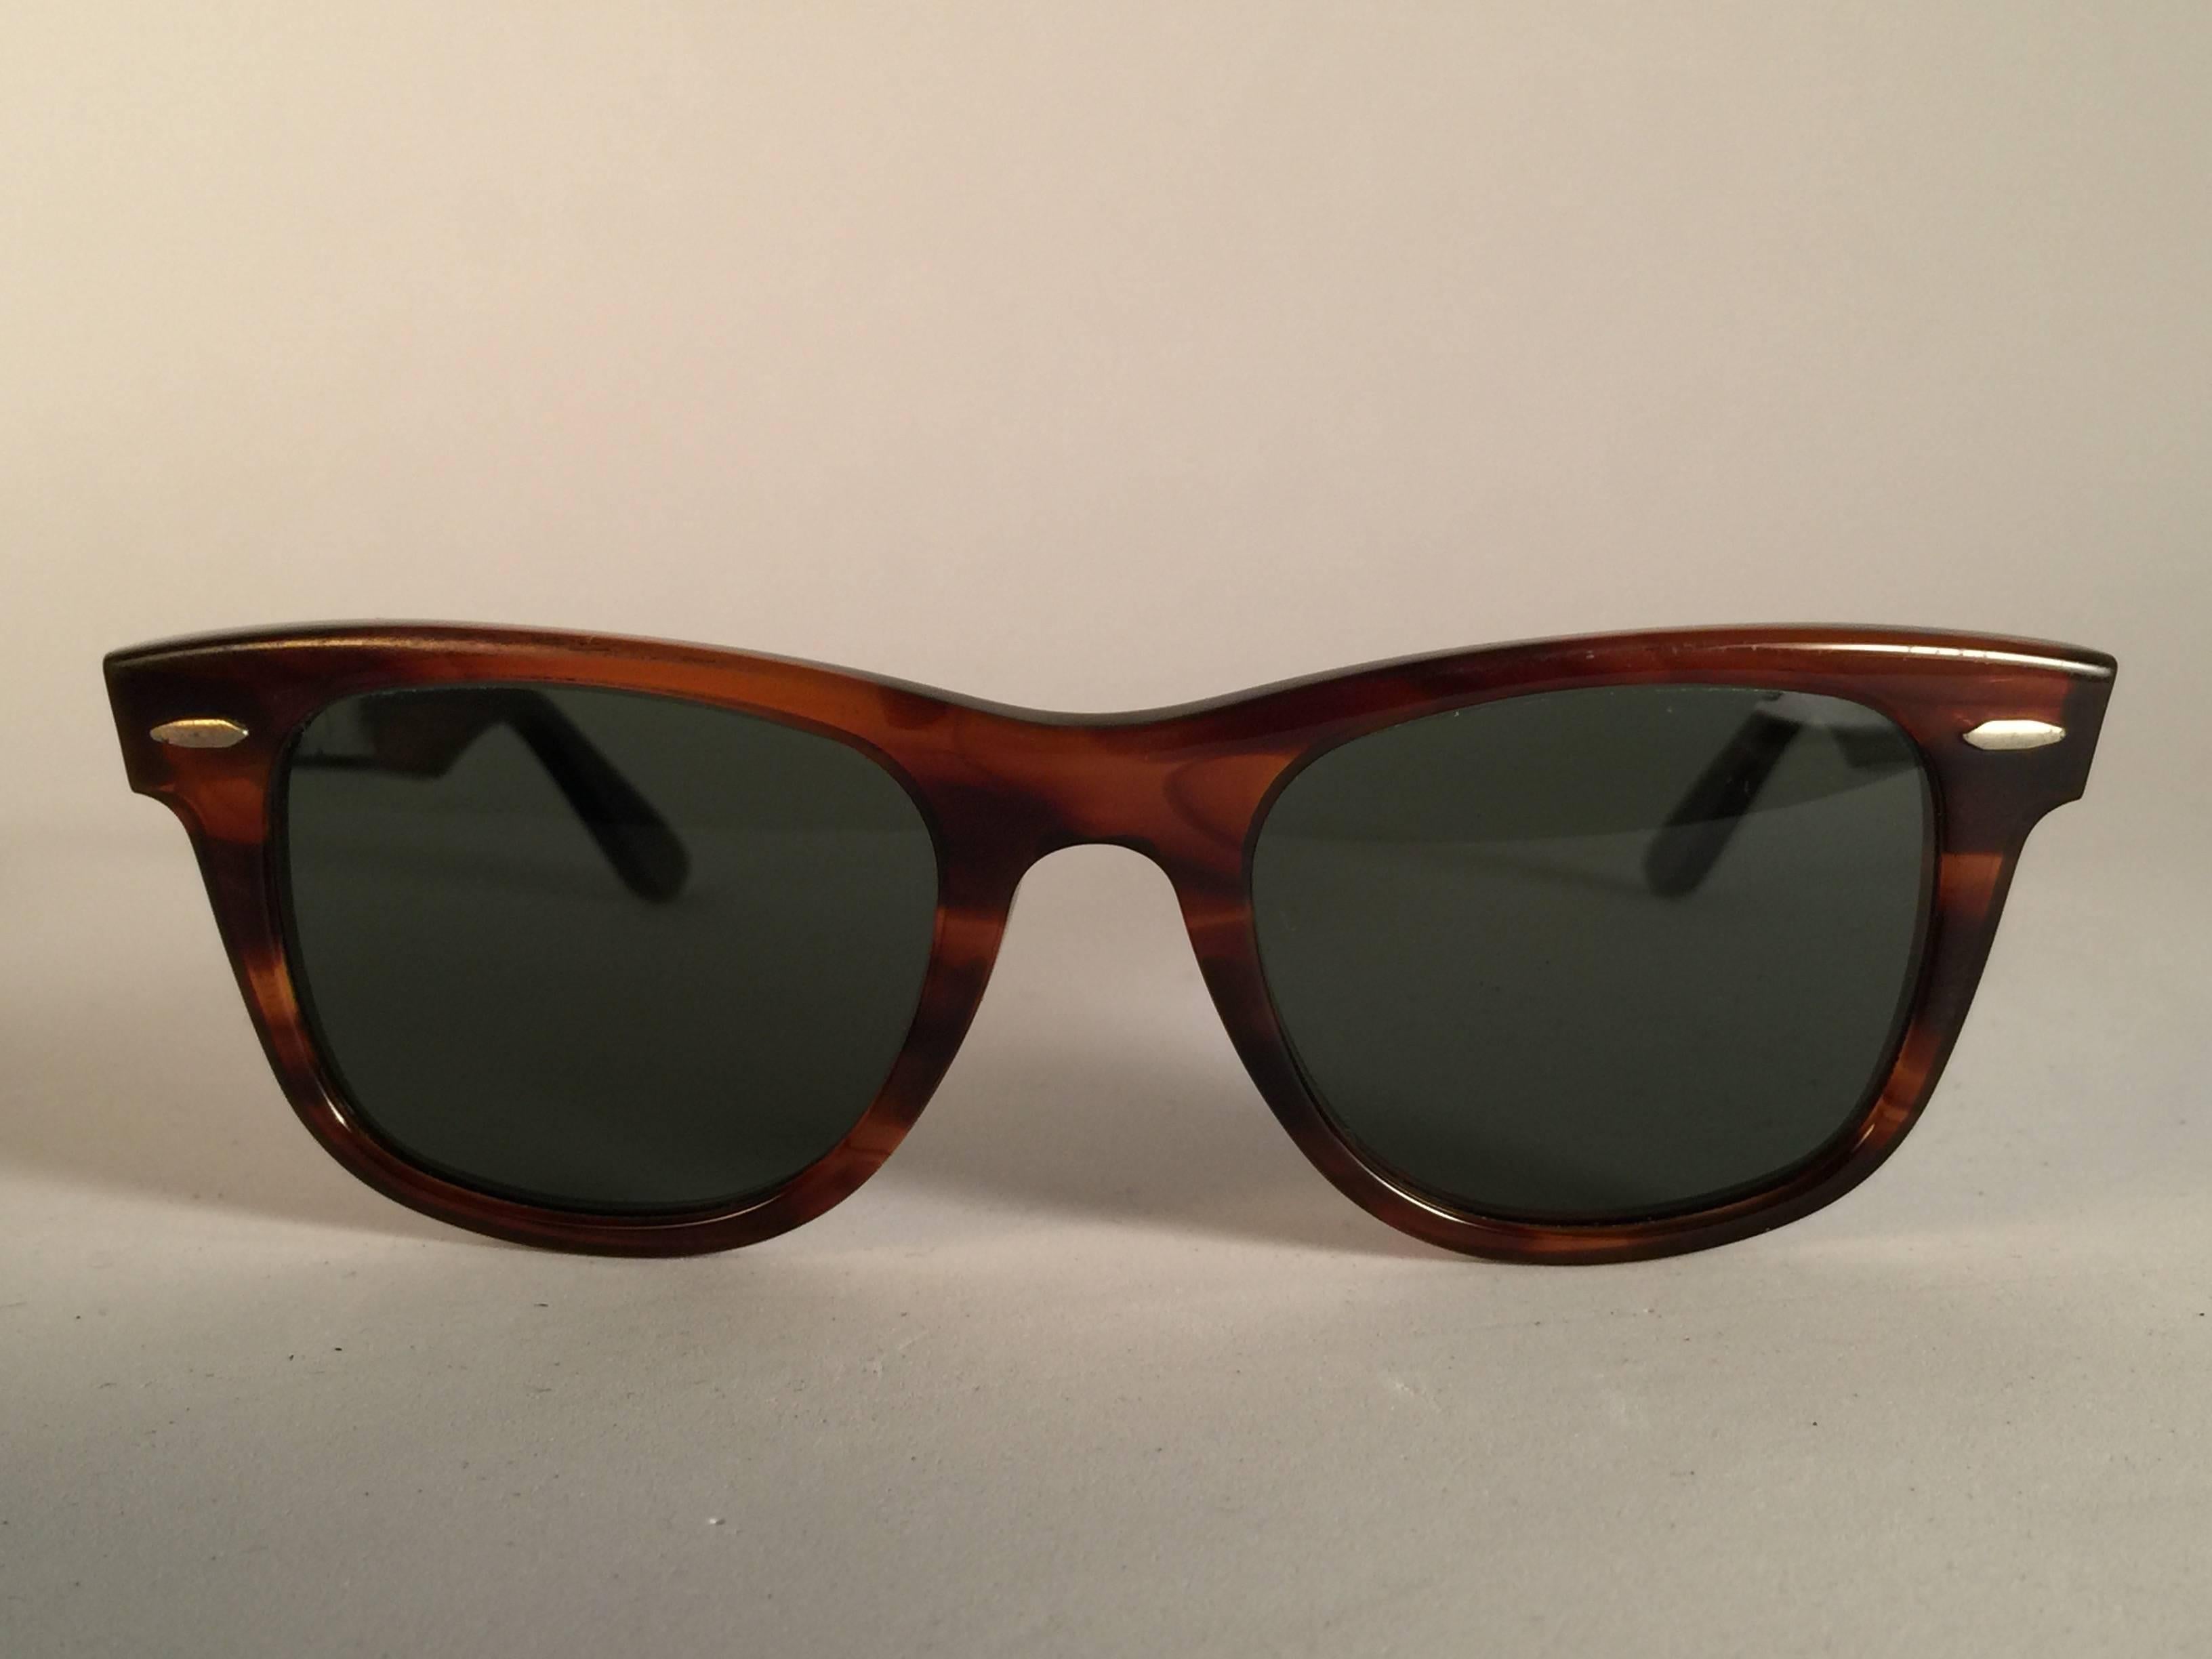 New classic Wayfarer in tortoise smallest size available.
Please notice that this item is nearly 40 years old and could show some storage wear on lenses.

New, ever worn or displayed. Made in USA.

FRONT : 13 CMS
LENS HEIGHT : 3.8 CMS
LENS WIDTH